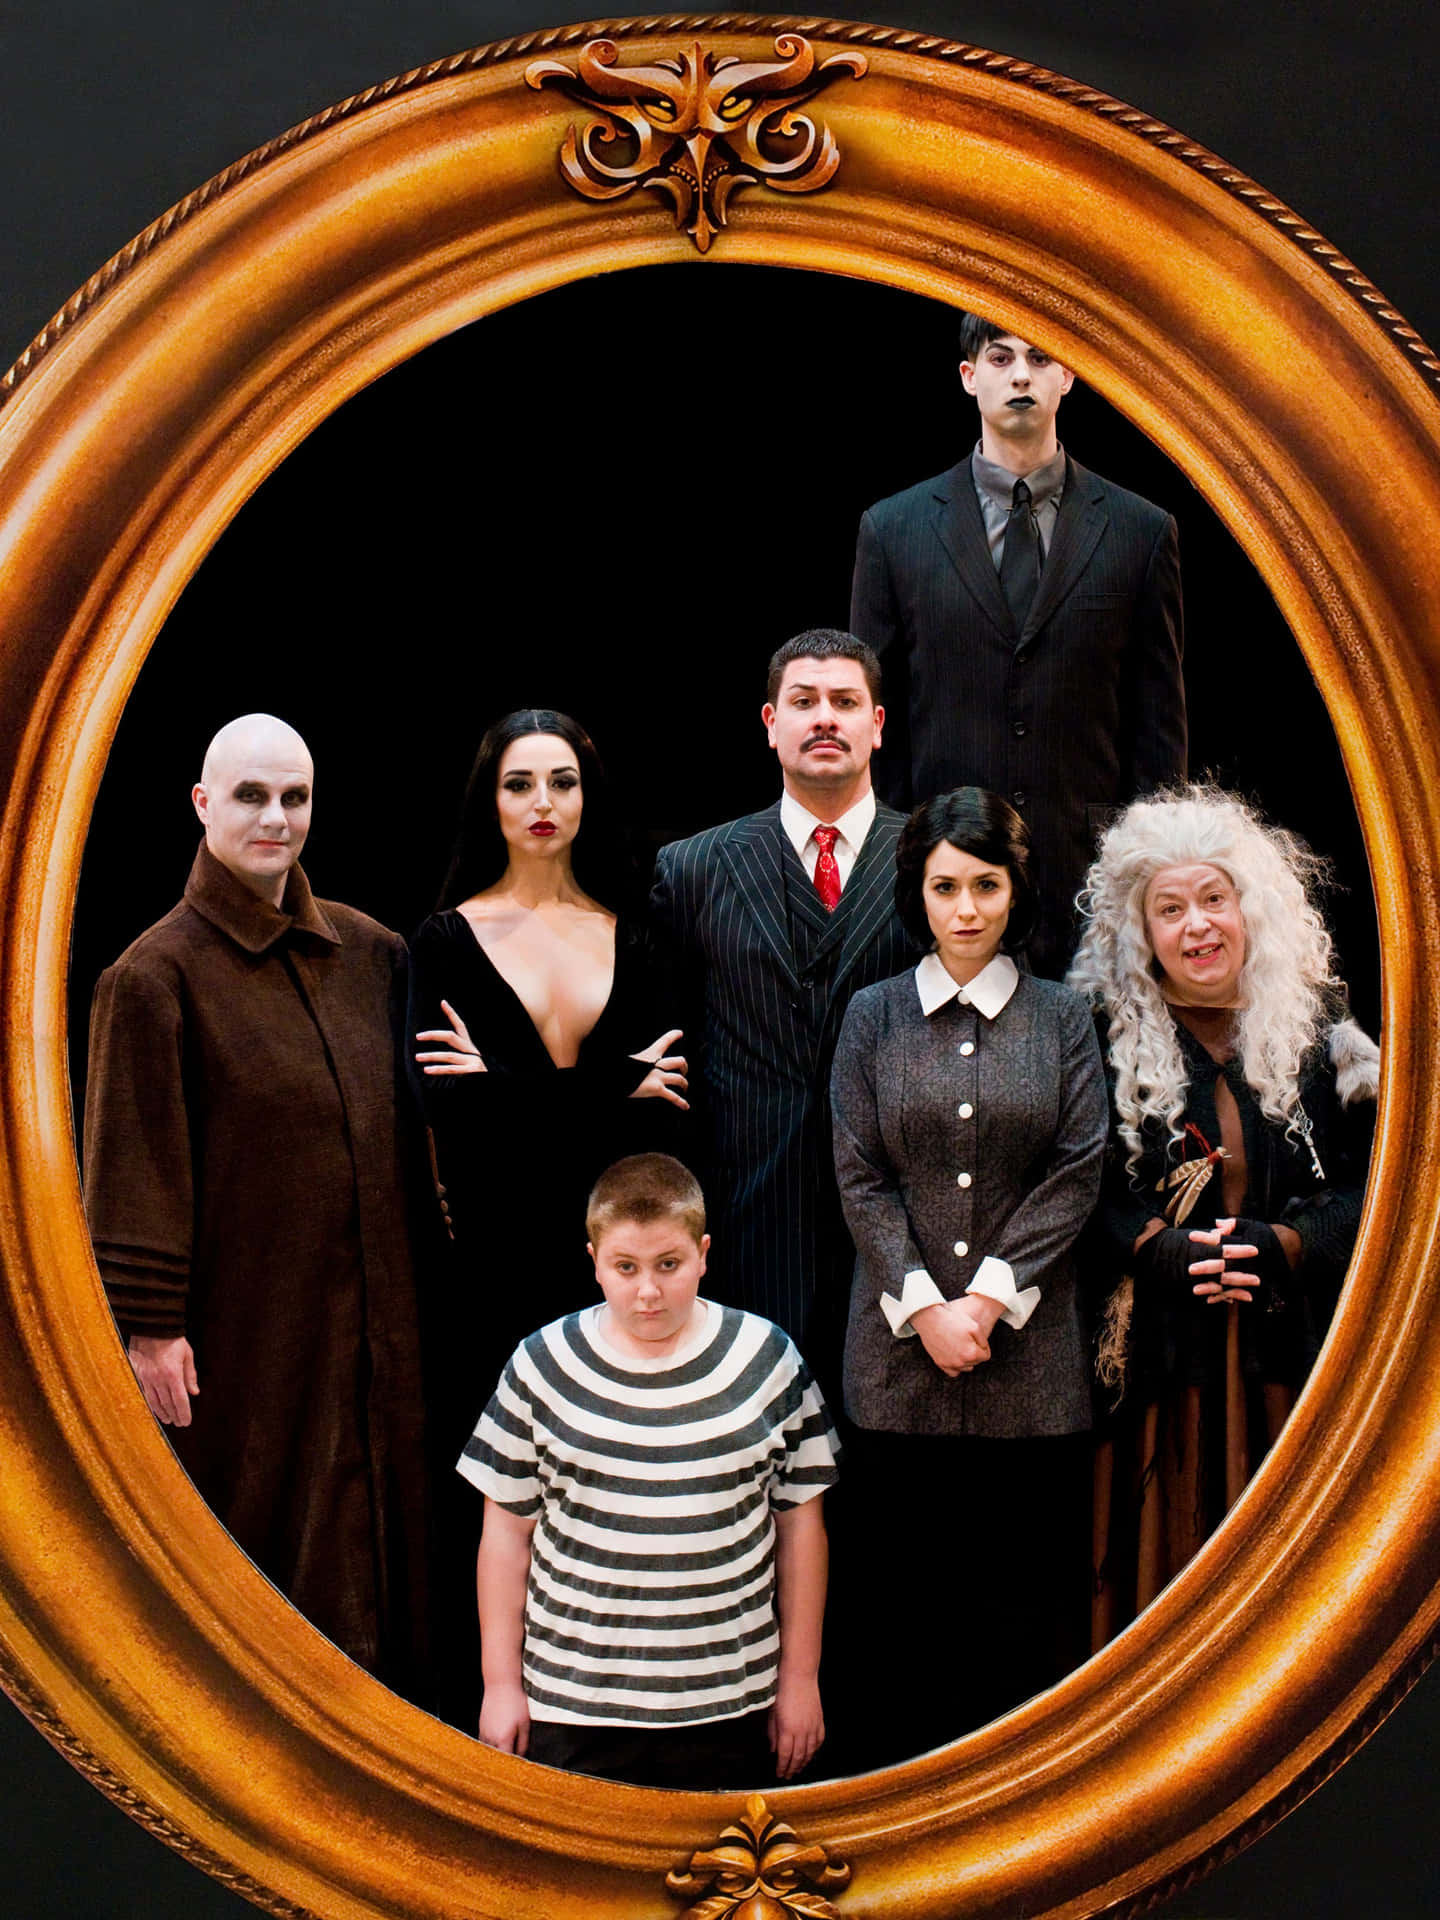 The Addams Family living the spooky life